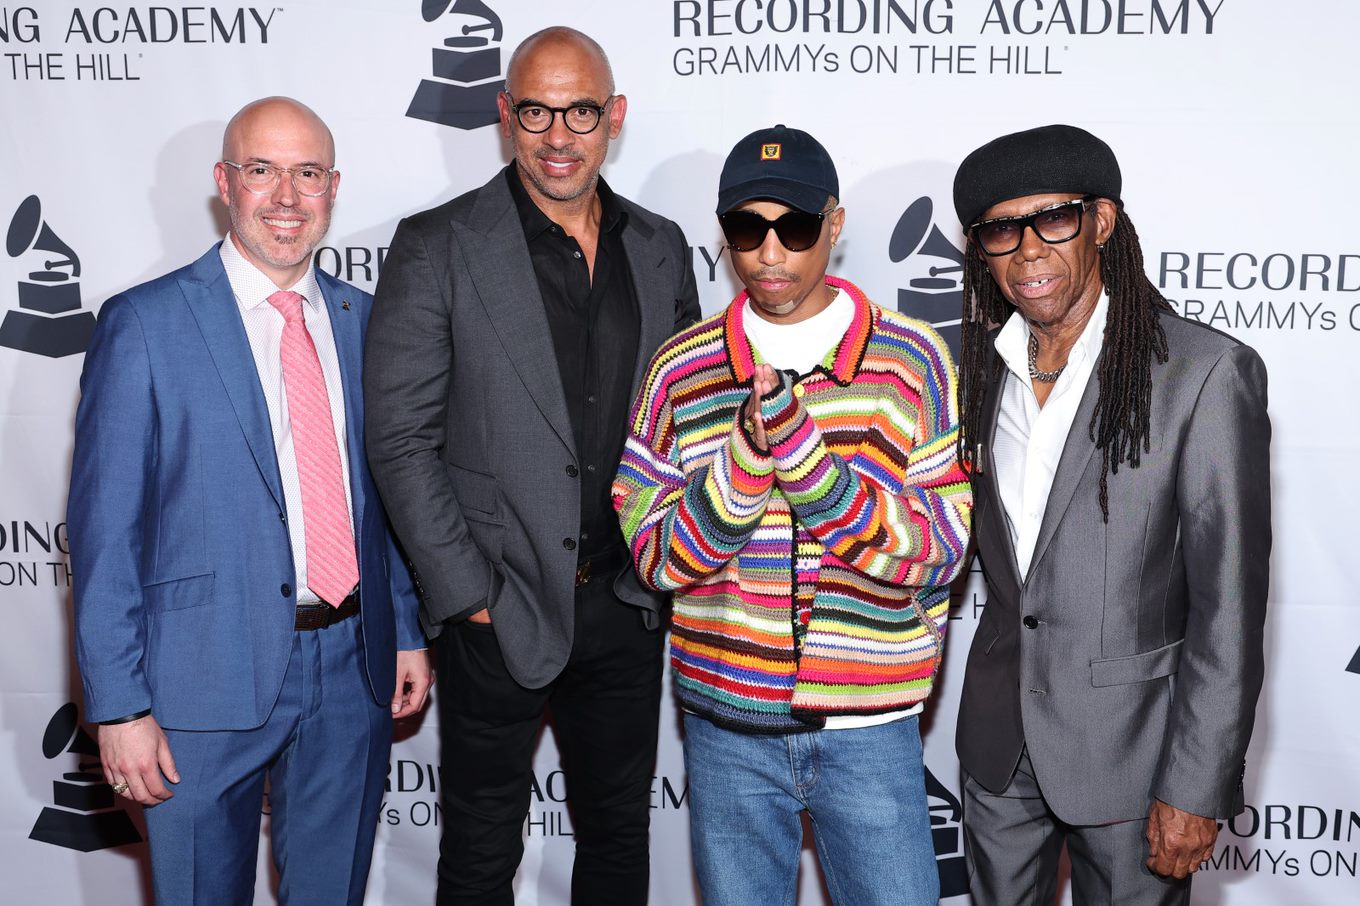 Recording Academy Leads Federal Effort To Limit Use Of Song Lyrics In Court